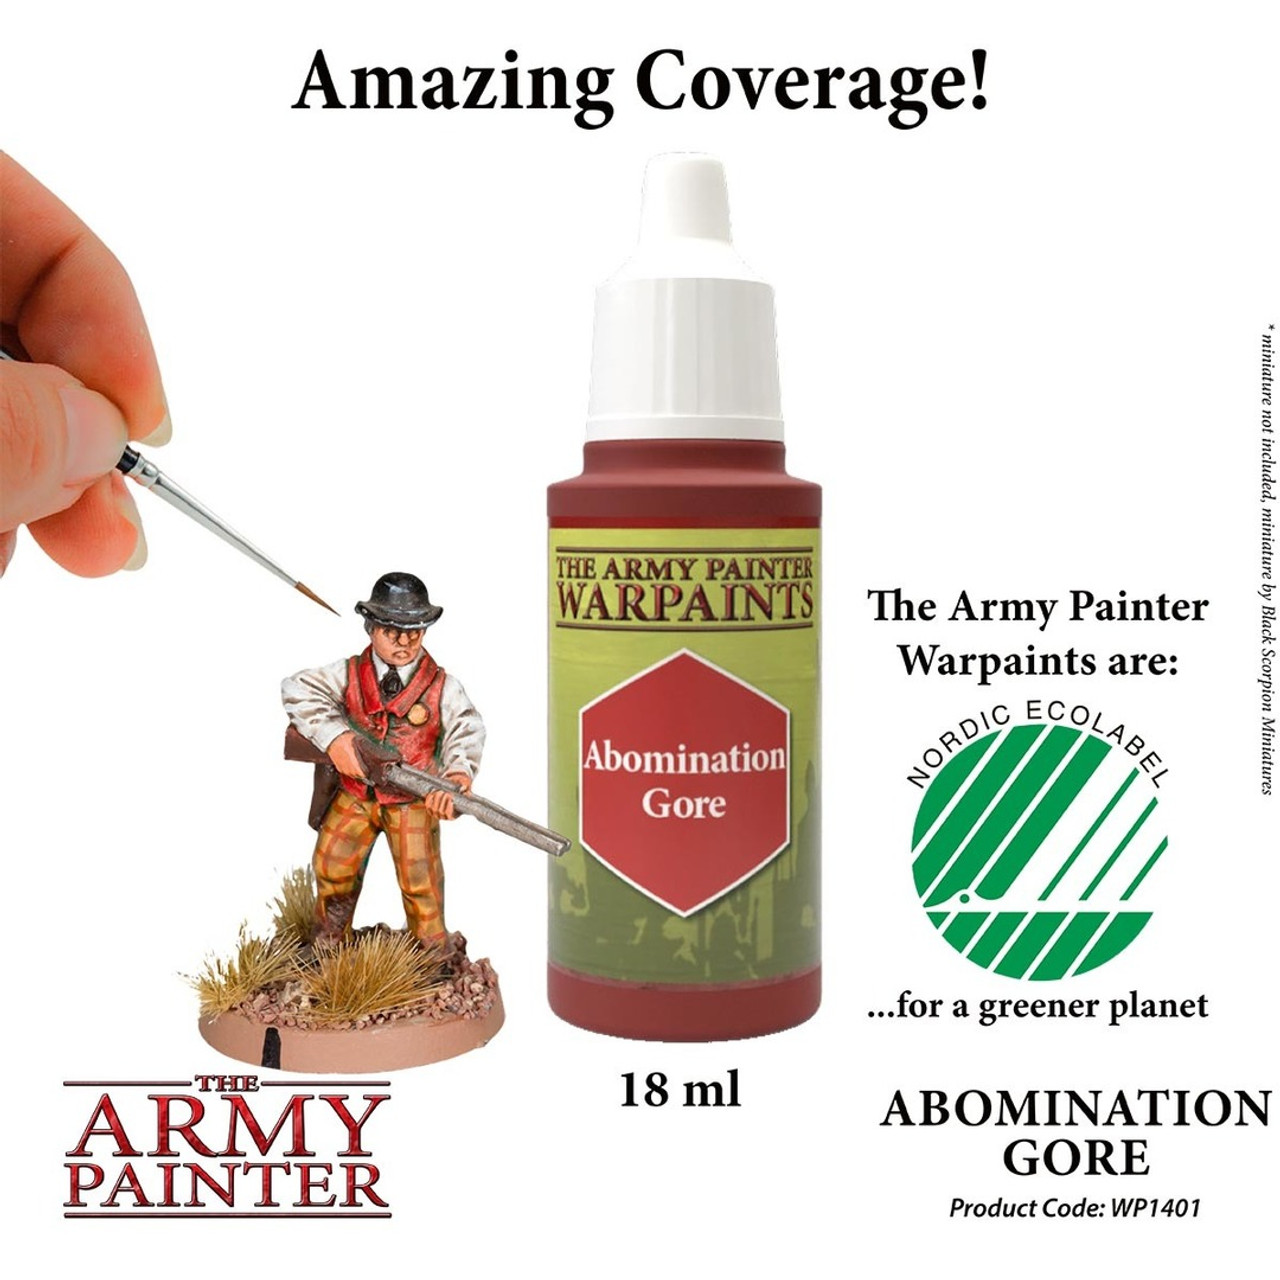 ARMWP1401 Abomination Gore - Acrylic Paint for Miniatures in 18 ml Dropper Bottle